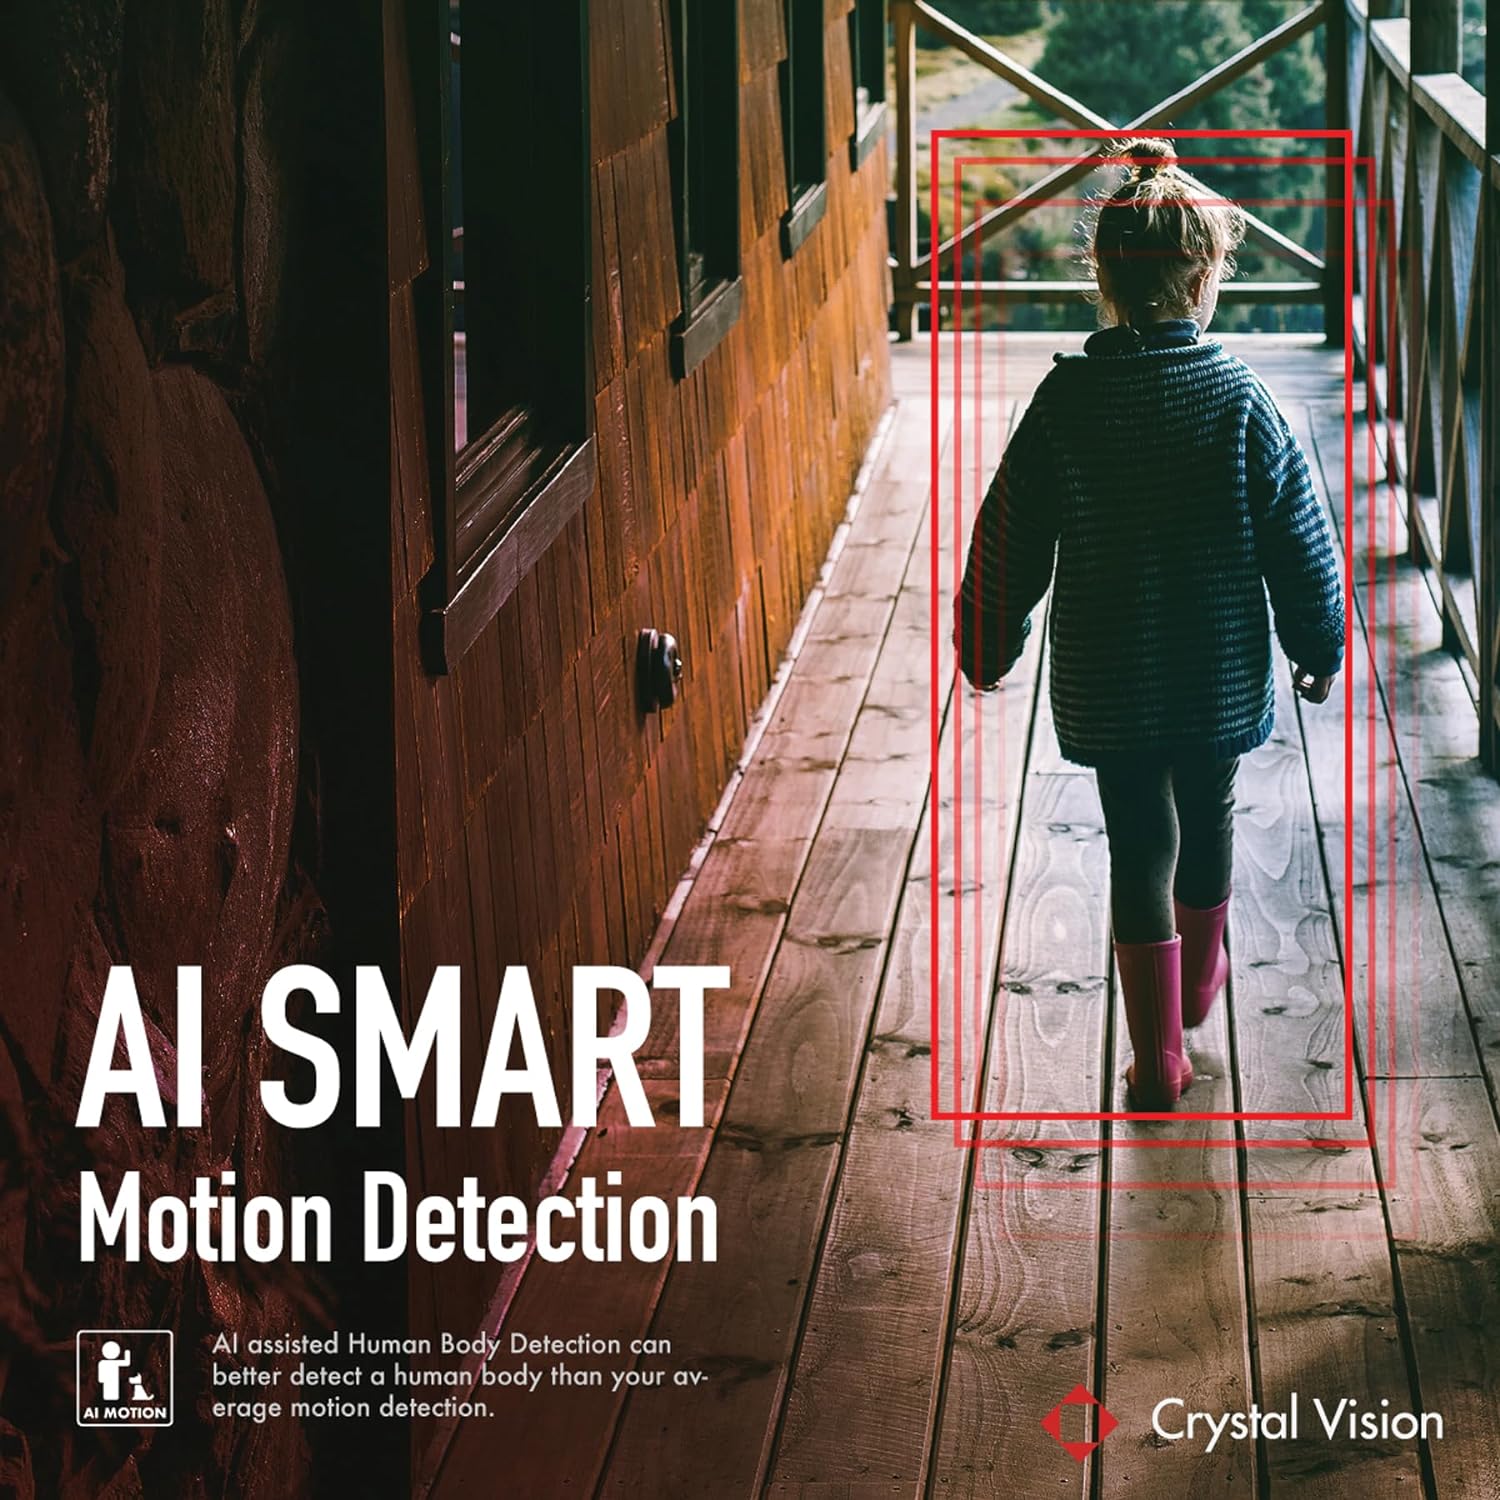 A child walking in a corridor with AI smart motion detection outlining them in red boxes by crystal Vision 3mp camera, for an advertisement by Crystal Vision